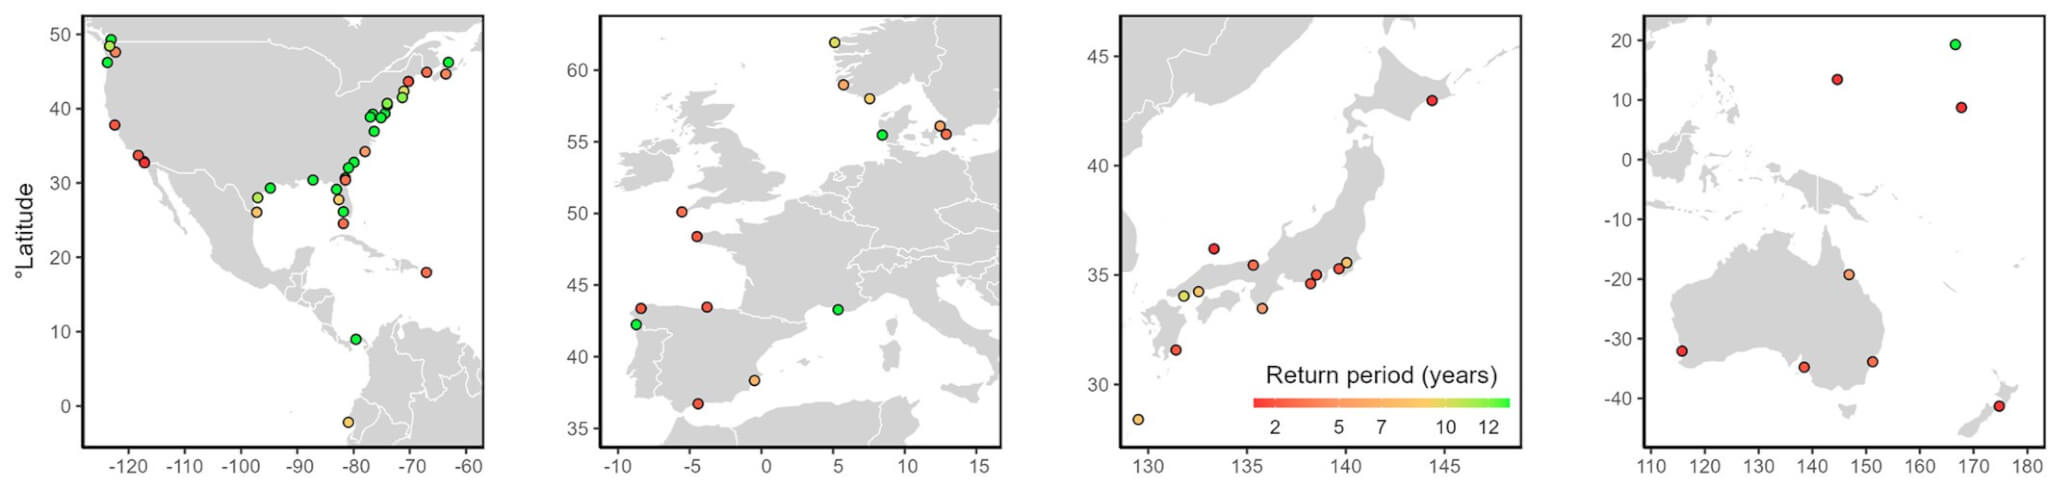 The image above shows the locations of some of the 300 tide gauges for frequency analysis of extreme sea levels used in the new study